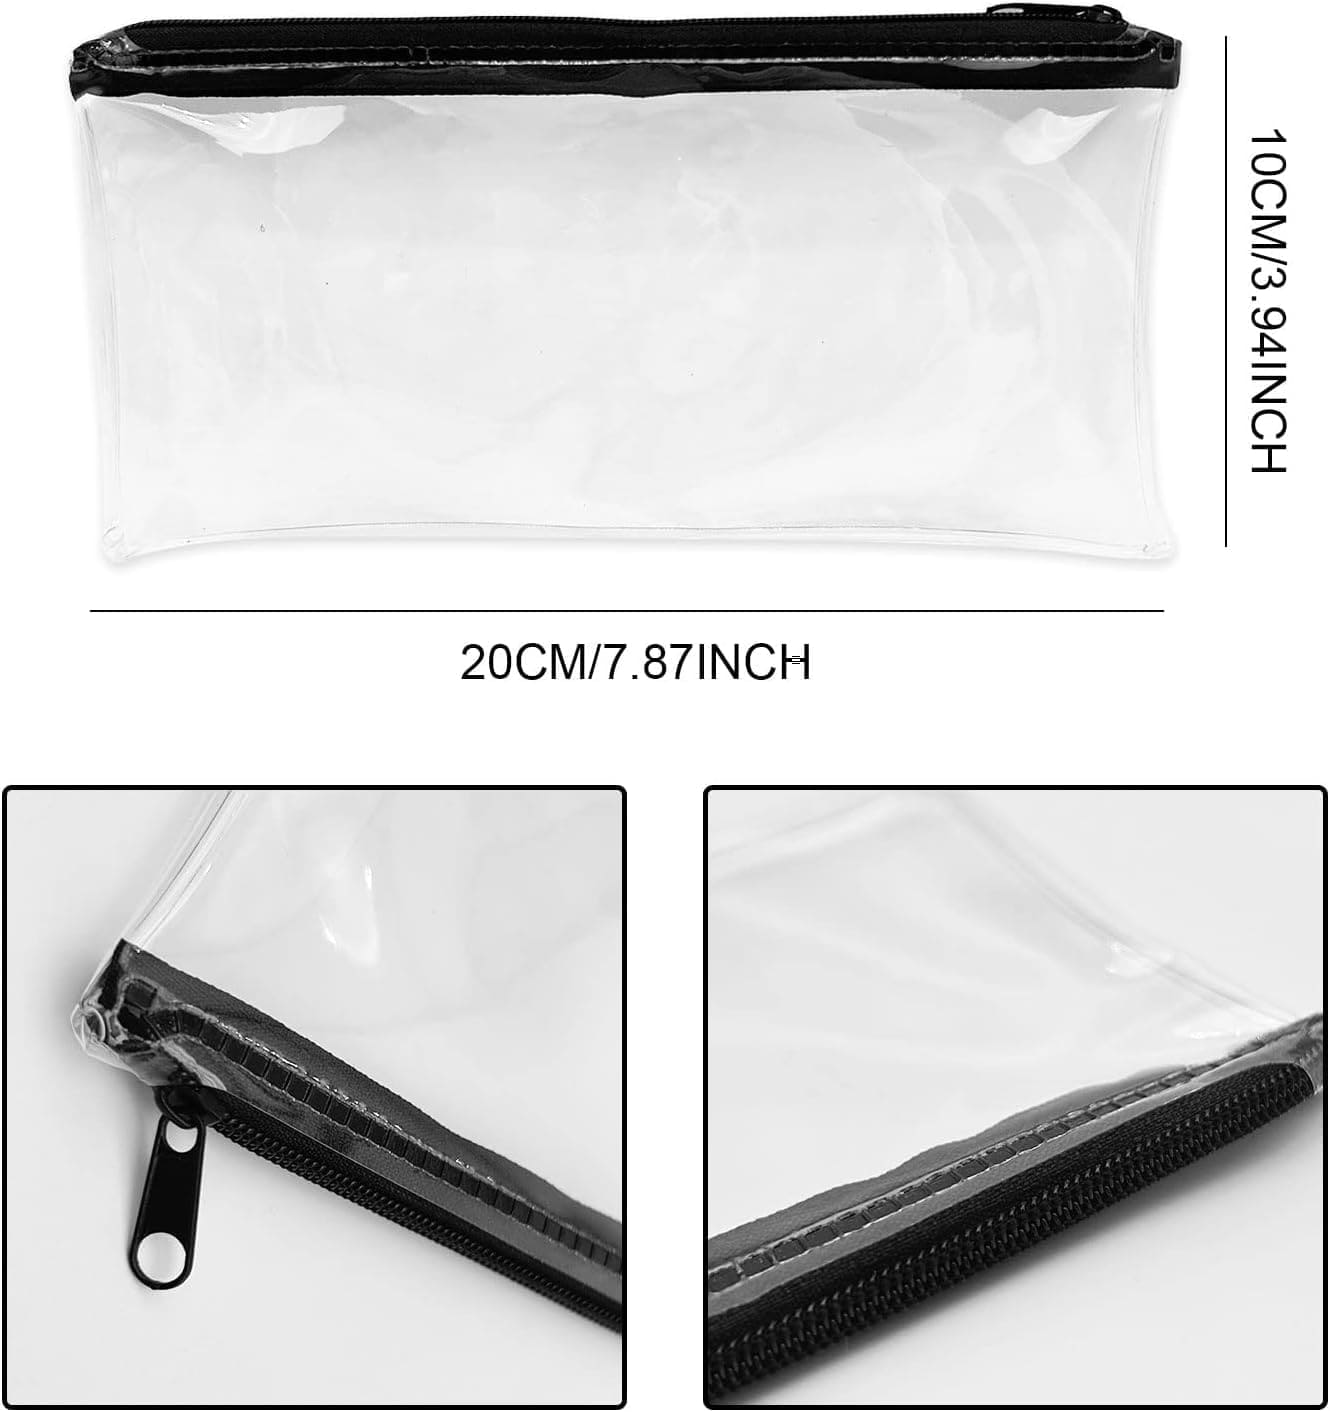 Zamasha Clear Pencil Case Black with Strong Zipper | 22x4x9 cm Stylish, Practical and Transparent Pencil Case | Versatile Storage for Stationery, Toiletries, Makeup, Travel & Office Supplies